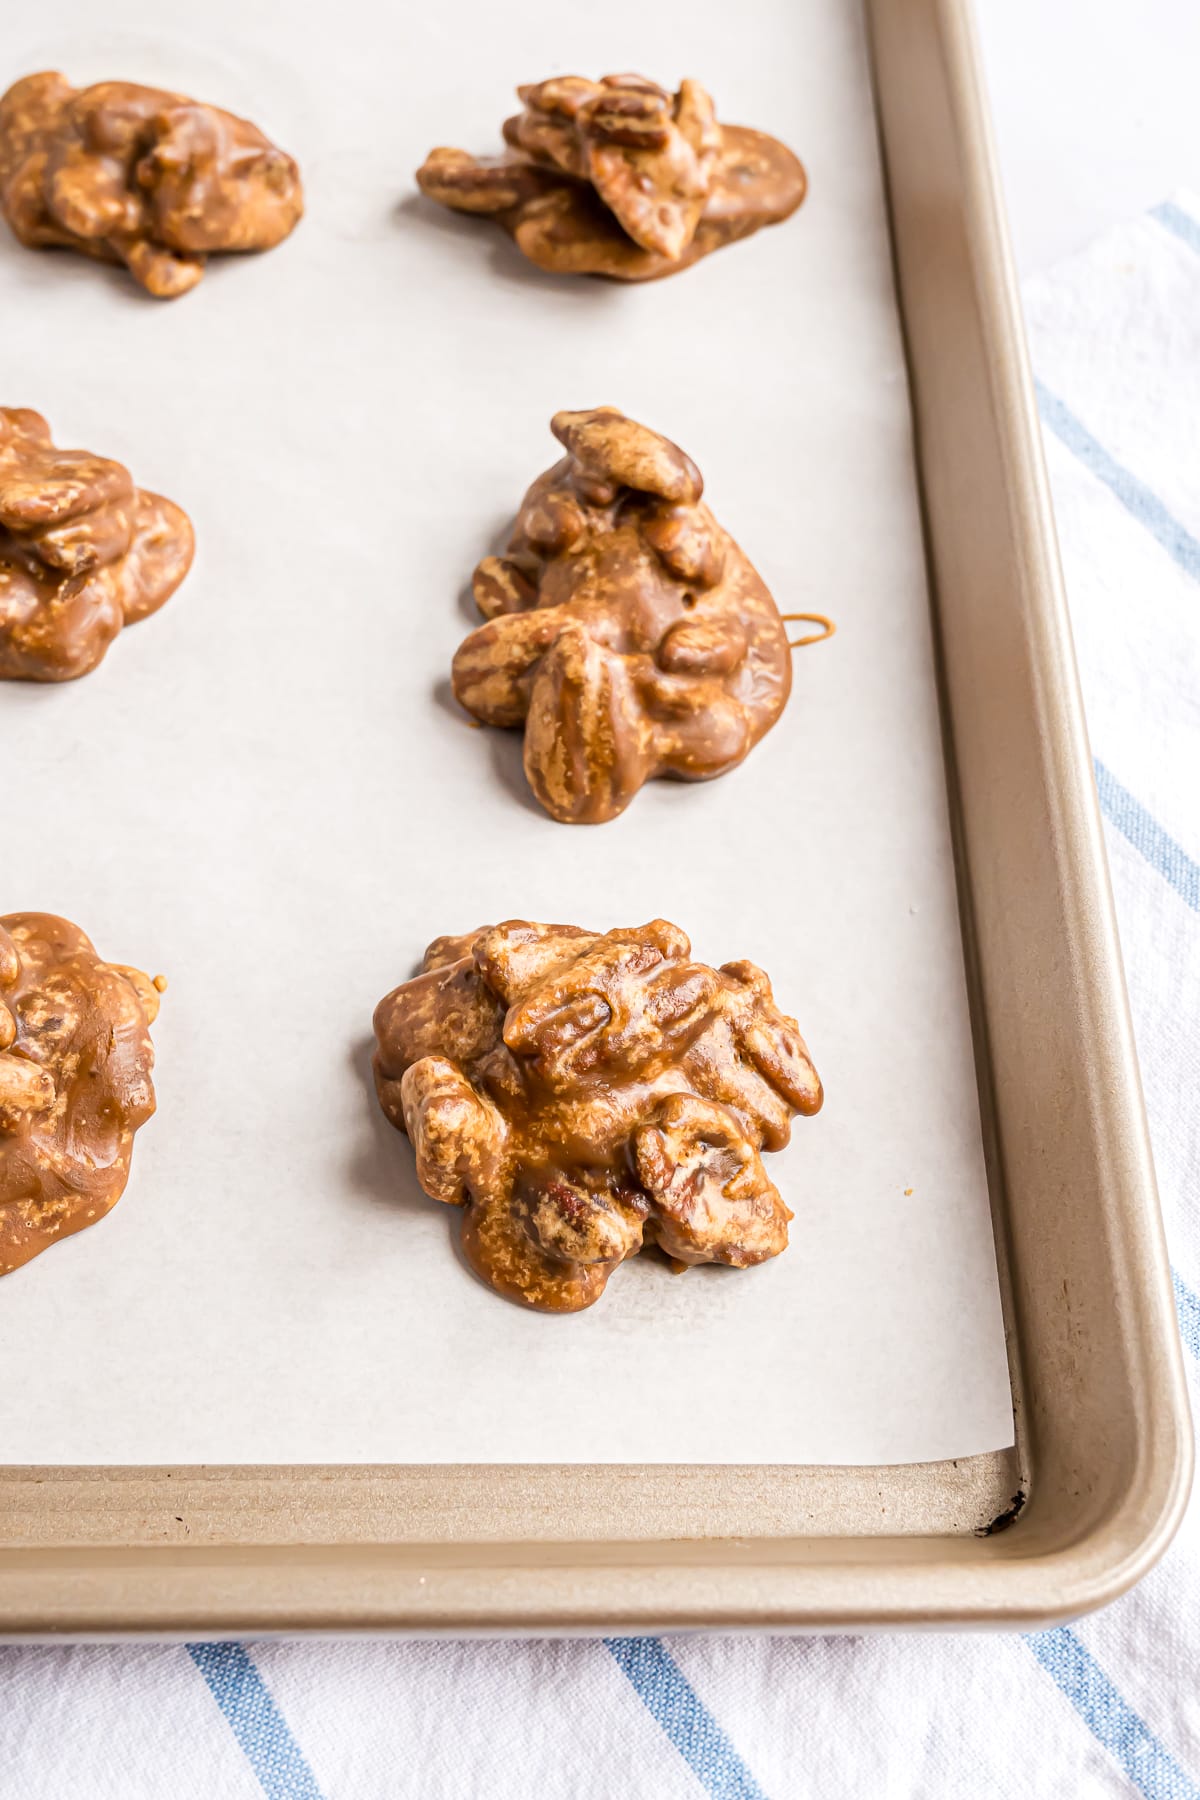 Pralines cooling on a parchment paper lined sheet.